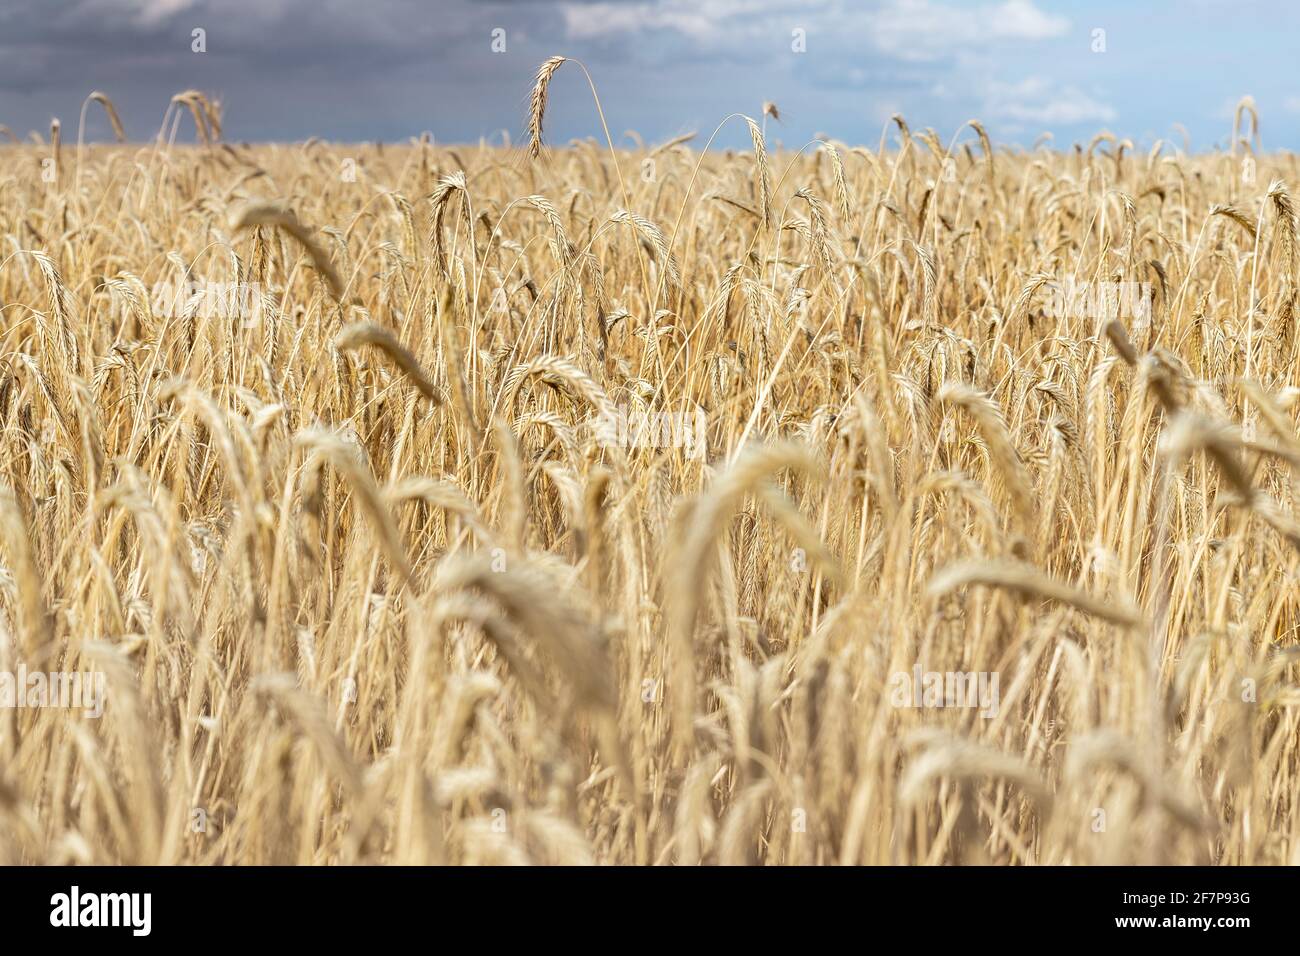 Scenic dramatic landscape of ripe golden organic wheat stalk field against dark stormy rainy overcast cloudy sky. Cereal crop harvest growth Stock Photo